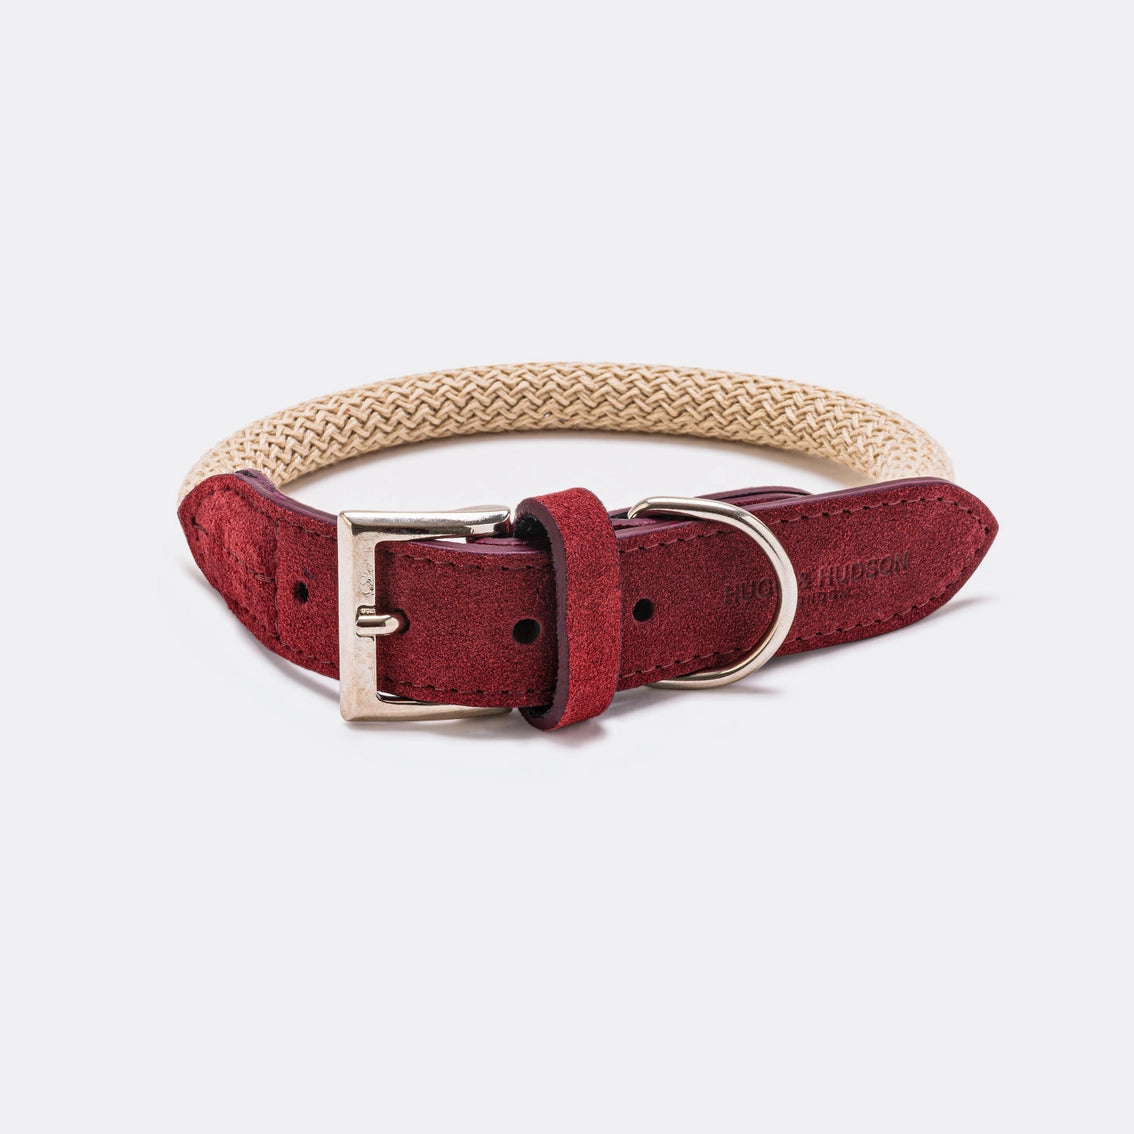 Round Rope and Burgundy Leather Dog Collar